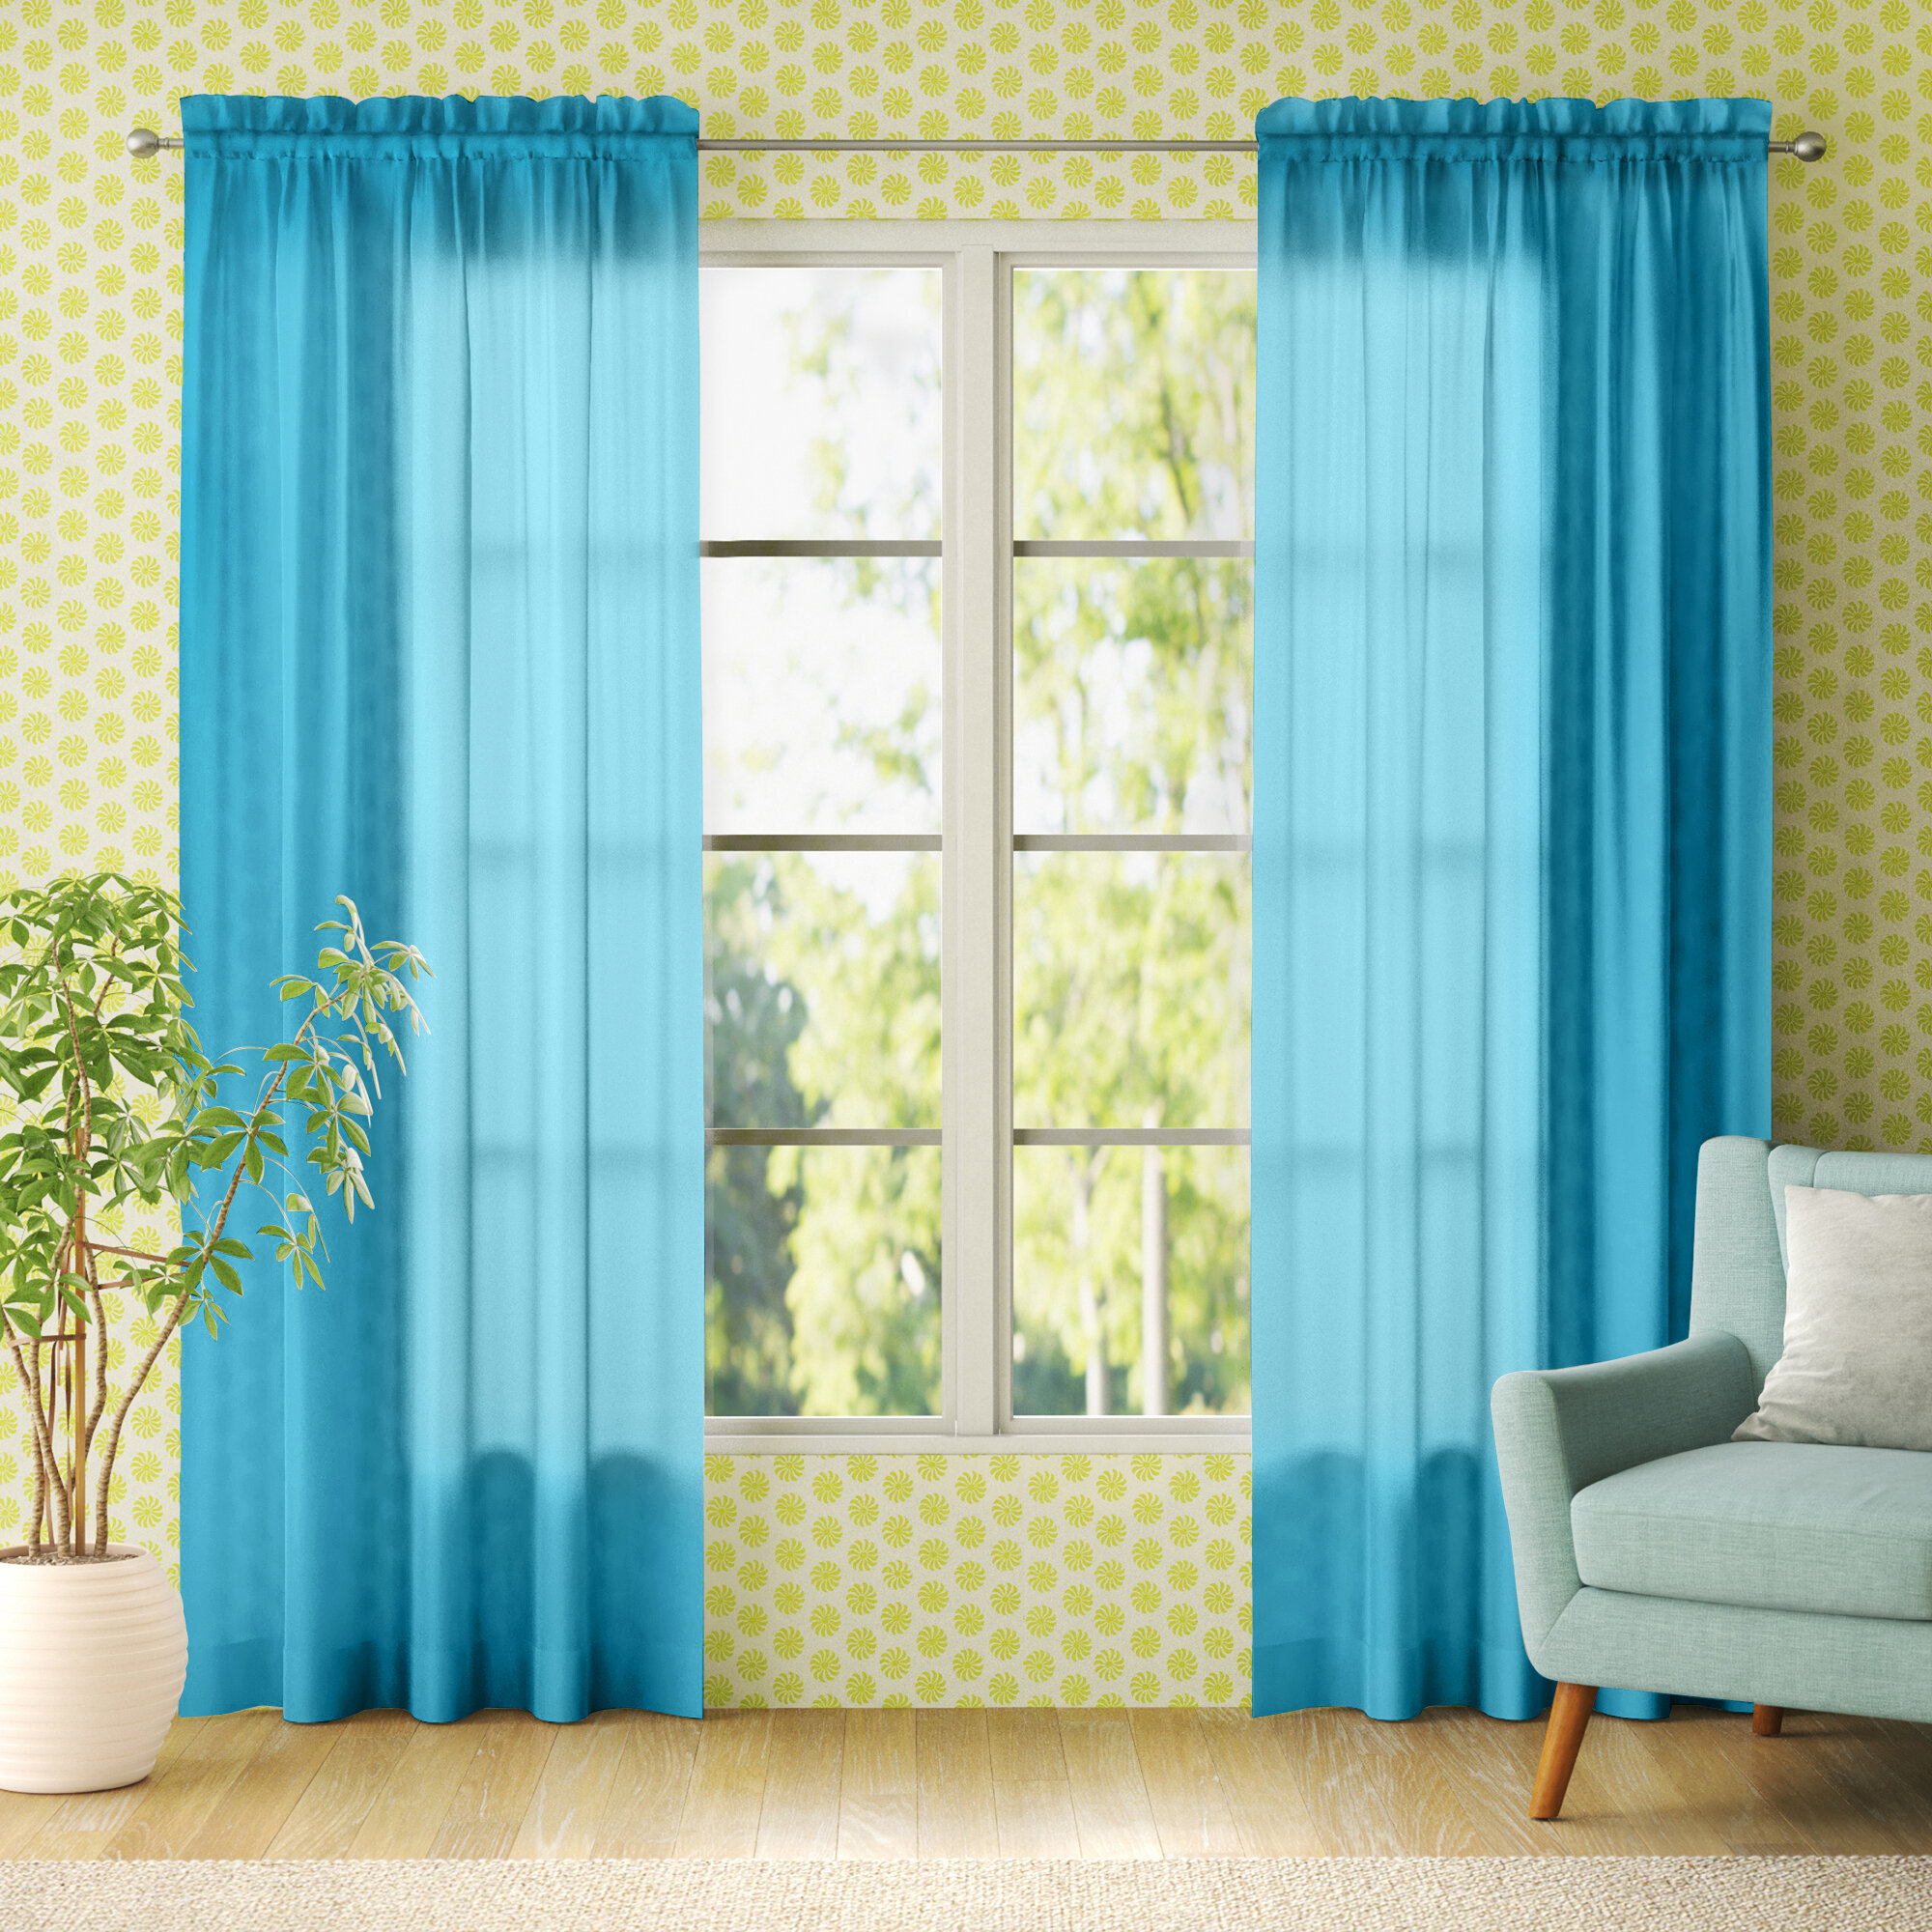 New Black Turquoise Curtain Panel Window Covering Drapes 